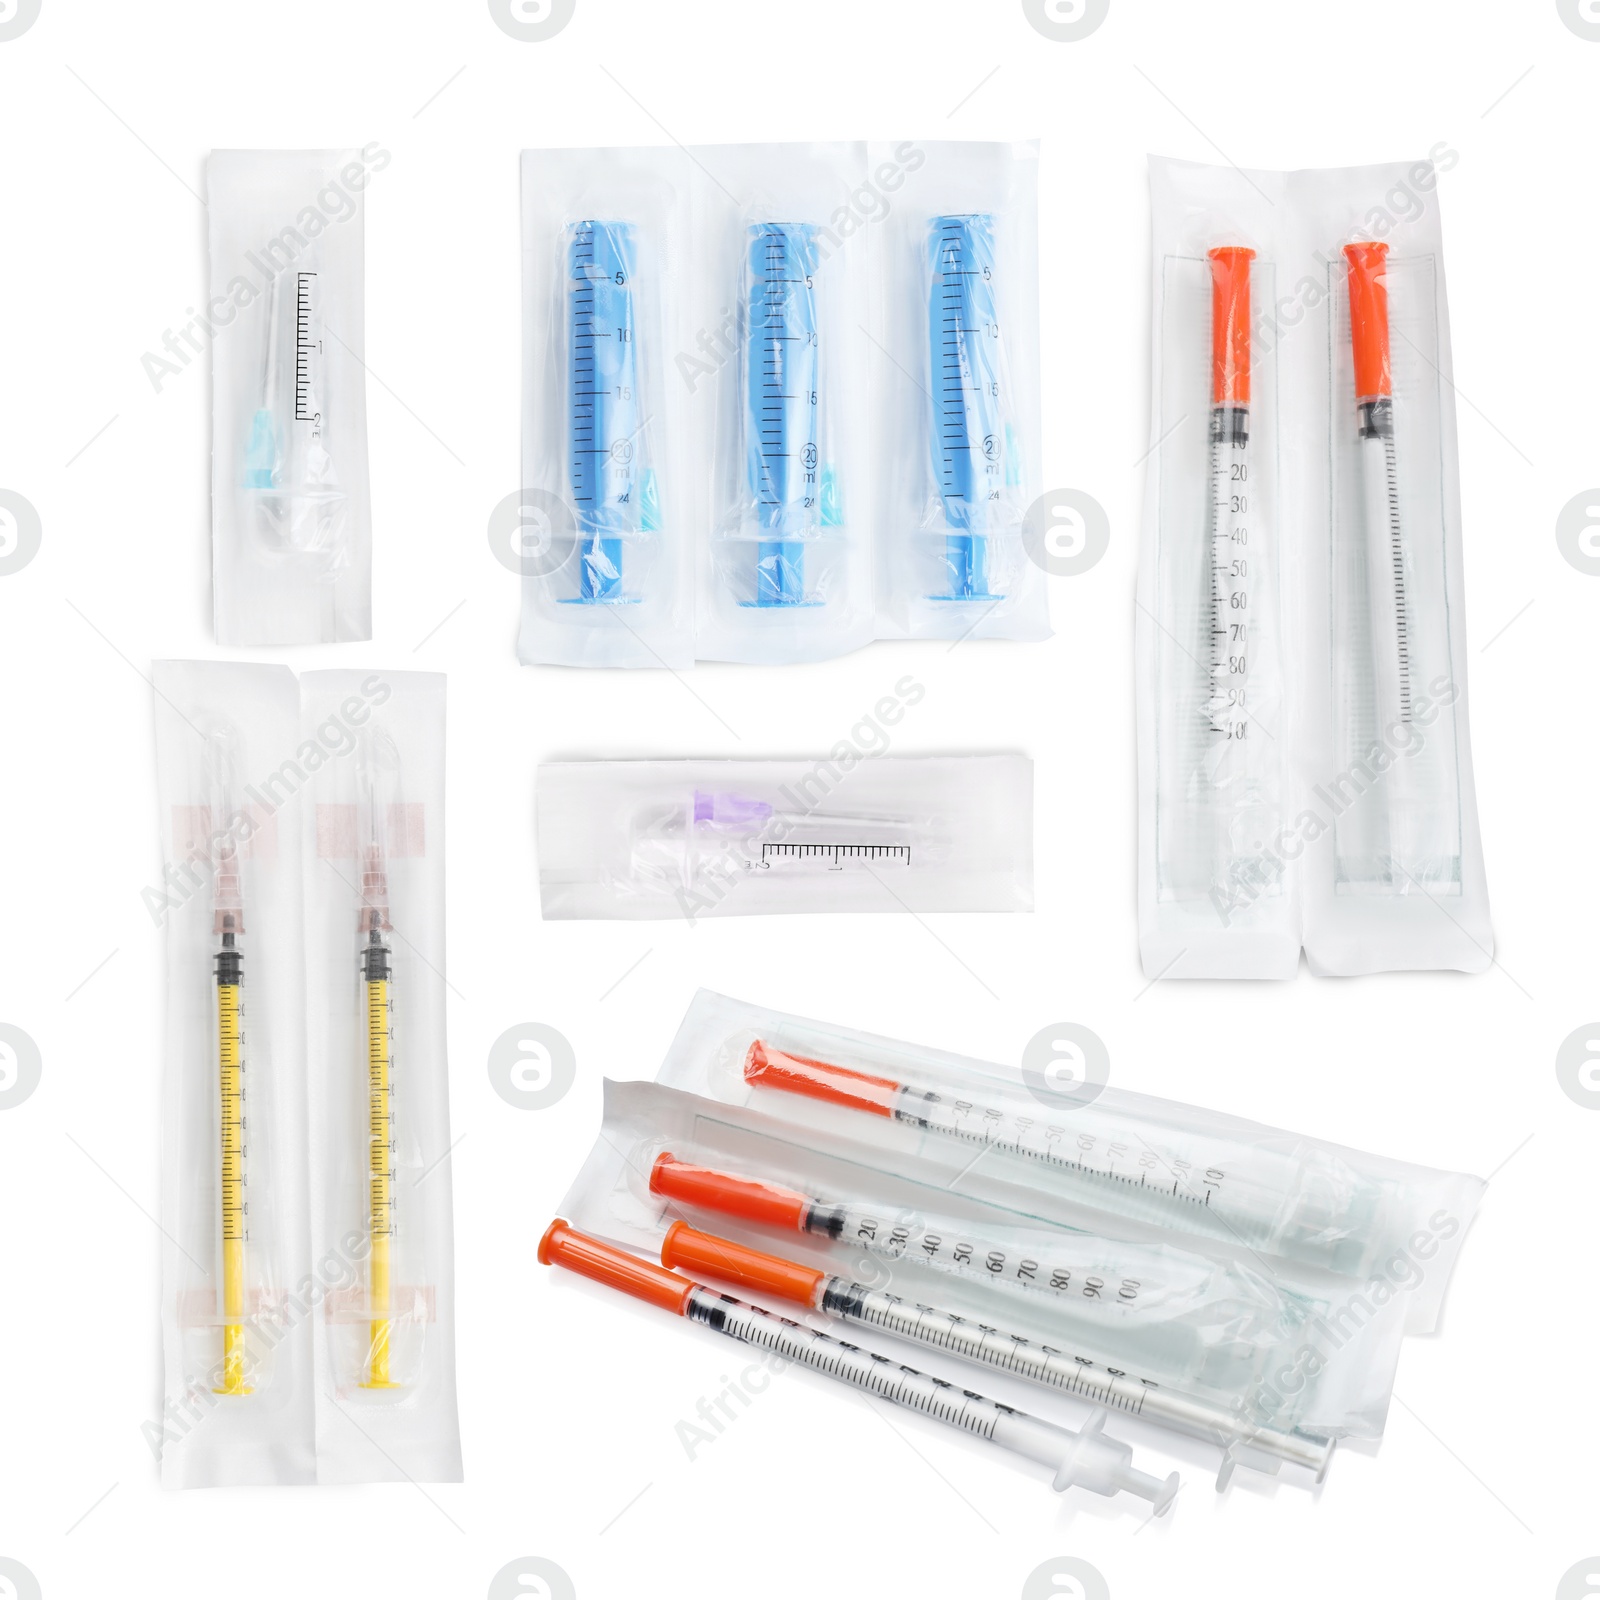 Image of Packed disposable syringes with needles on white background, collage